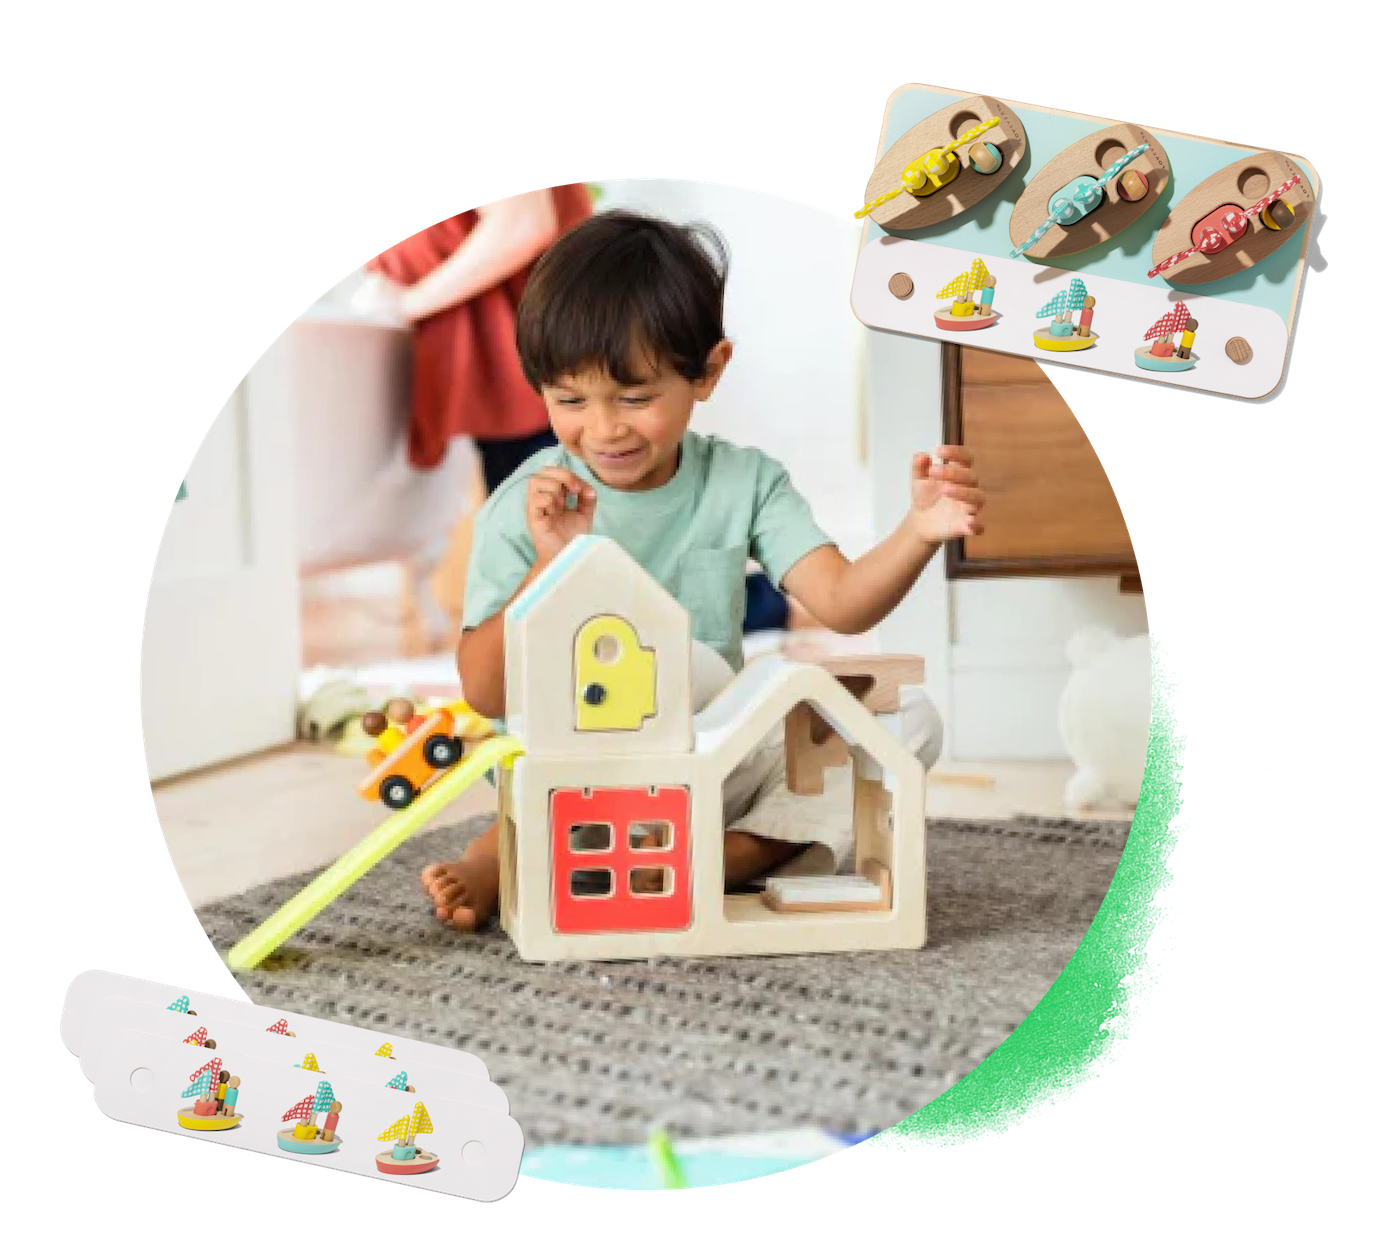 Wooden toys for 3-year-olds by Lovevery